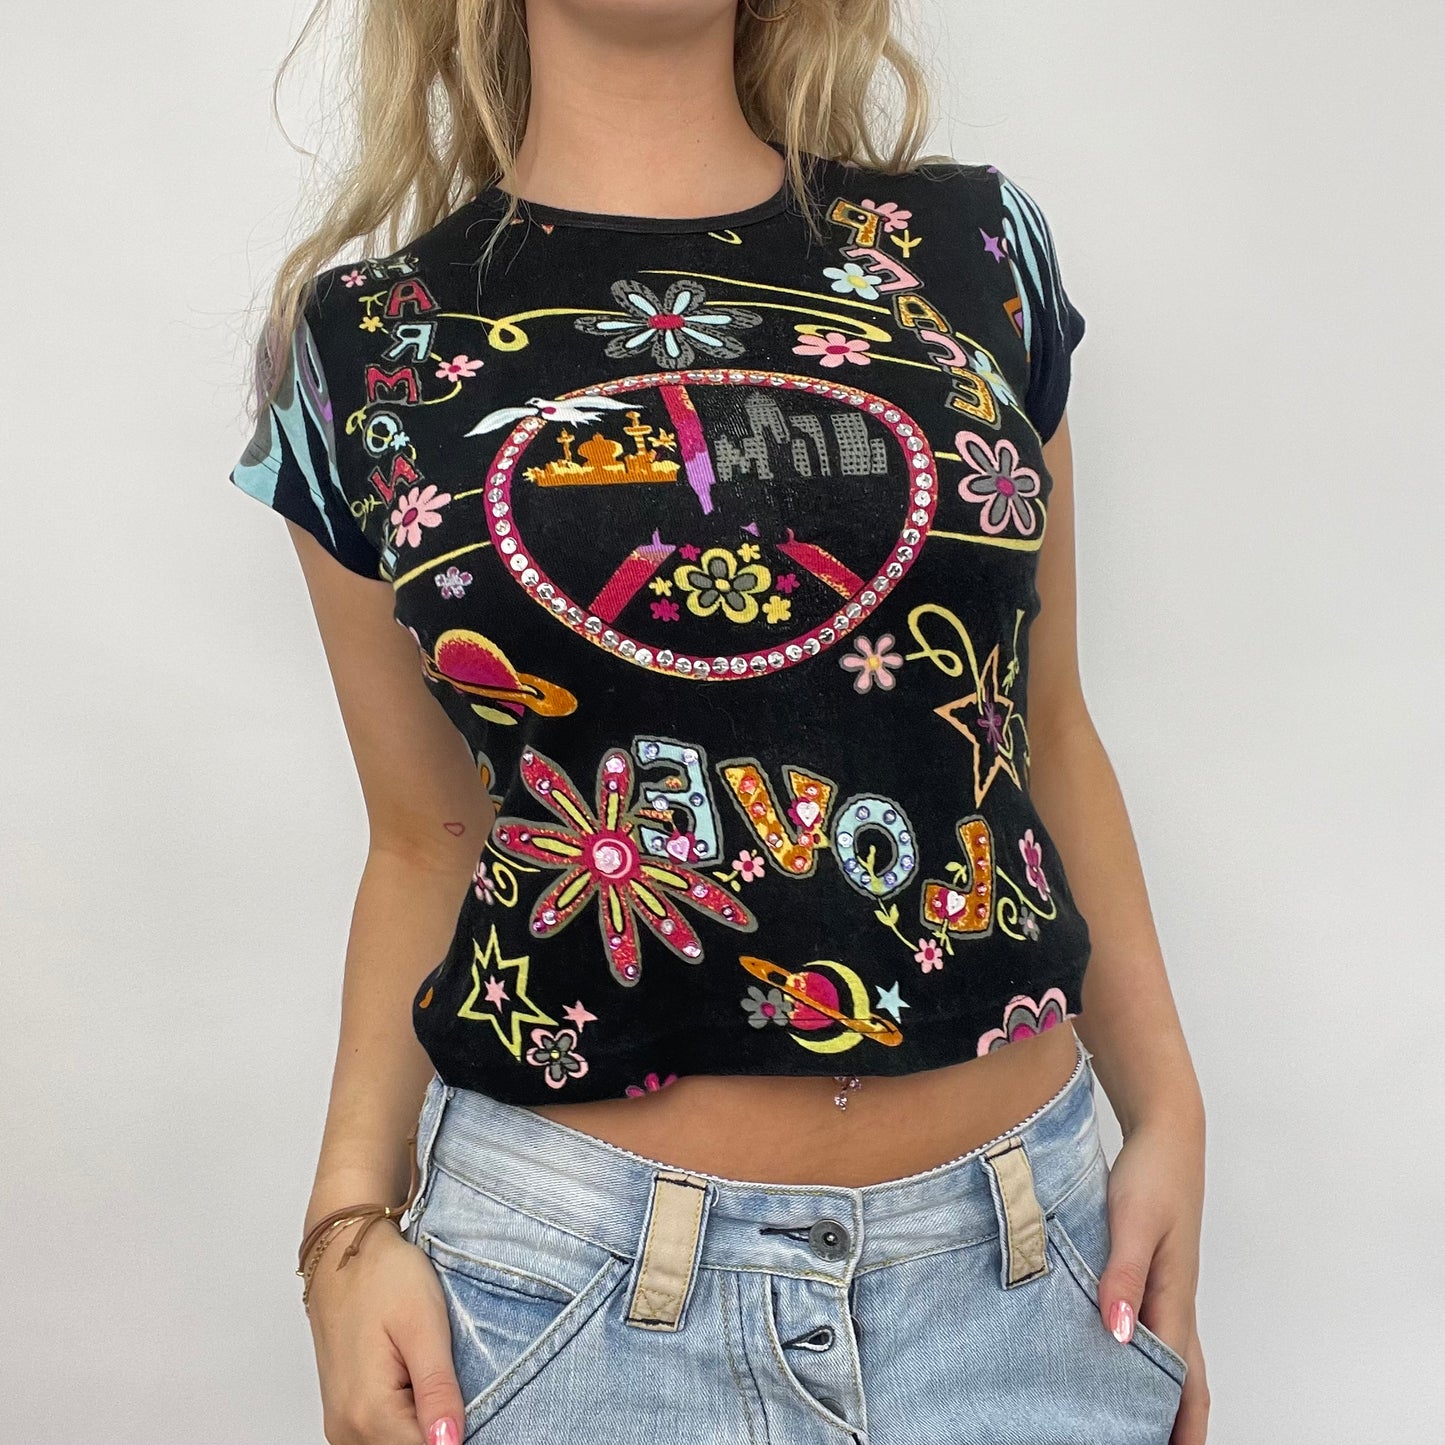 BEST PICKS | s/m black graphic t-shirt with sequin “love” writing